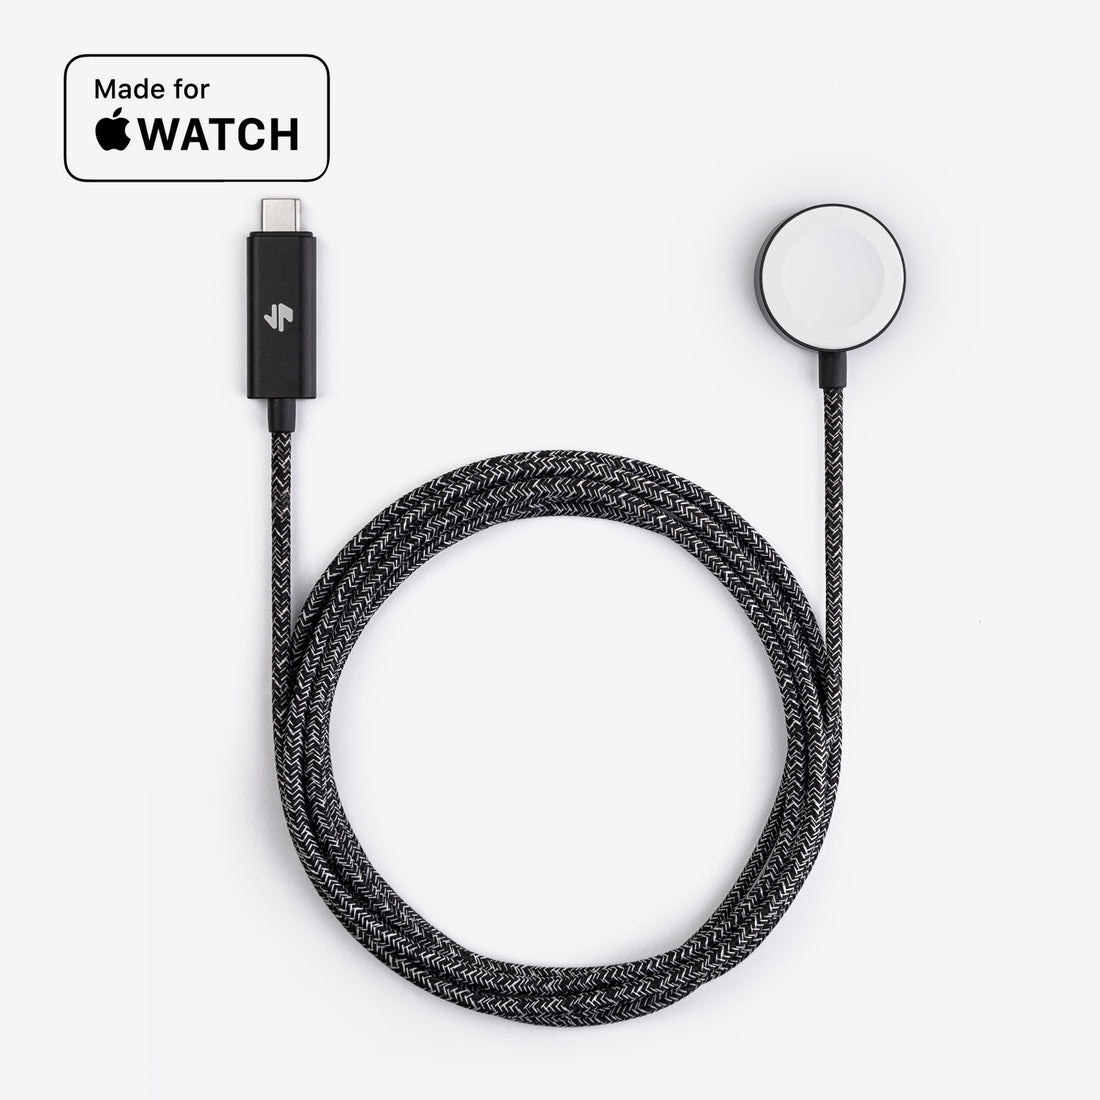 mophie USB-C Cable with USB-C Connector (2 m) - Apple